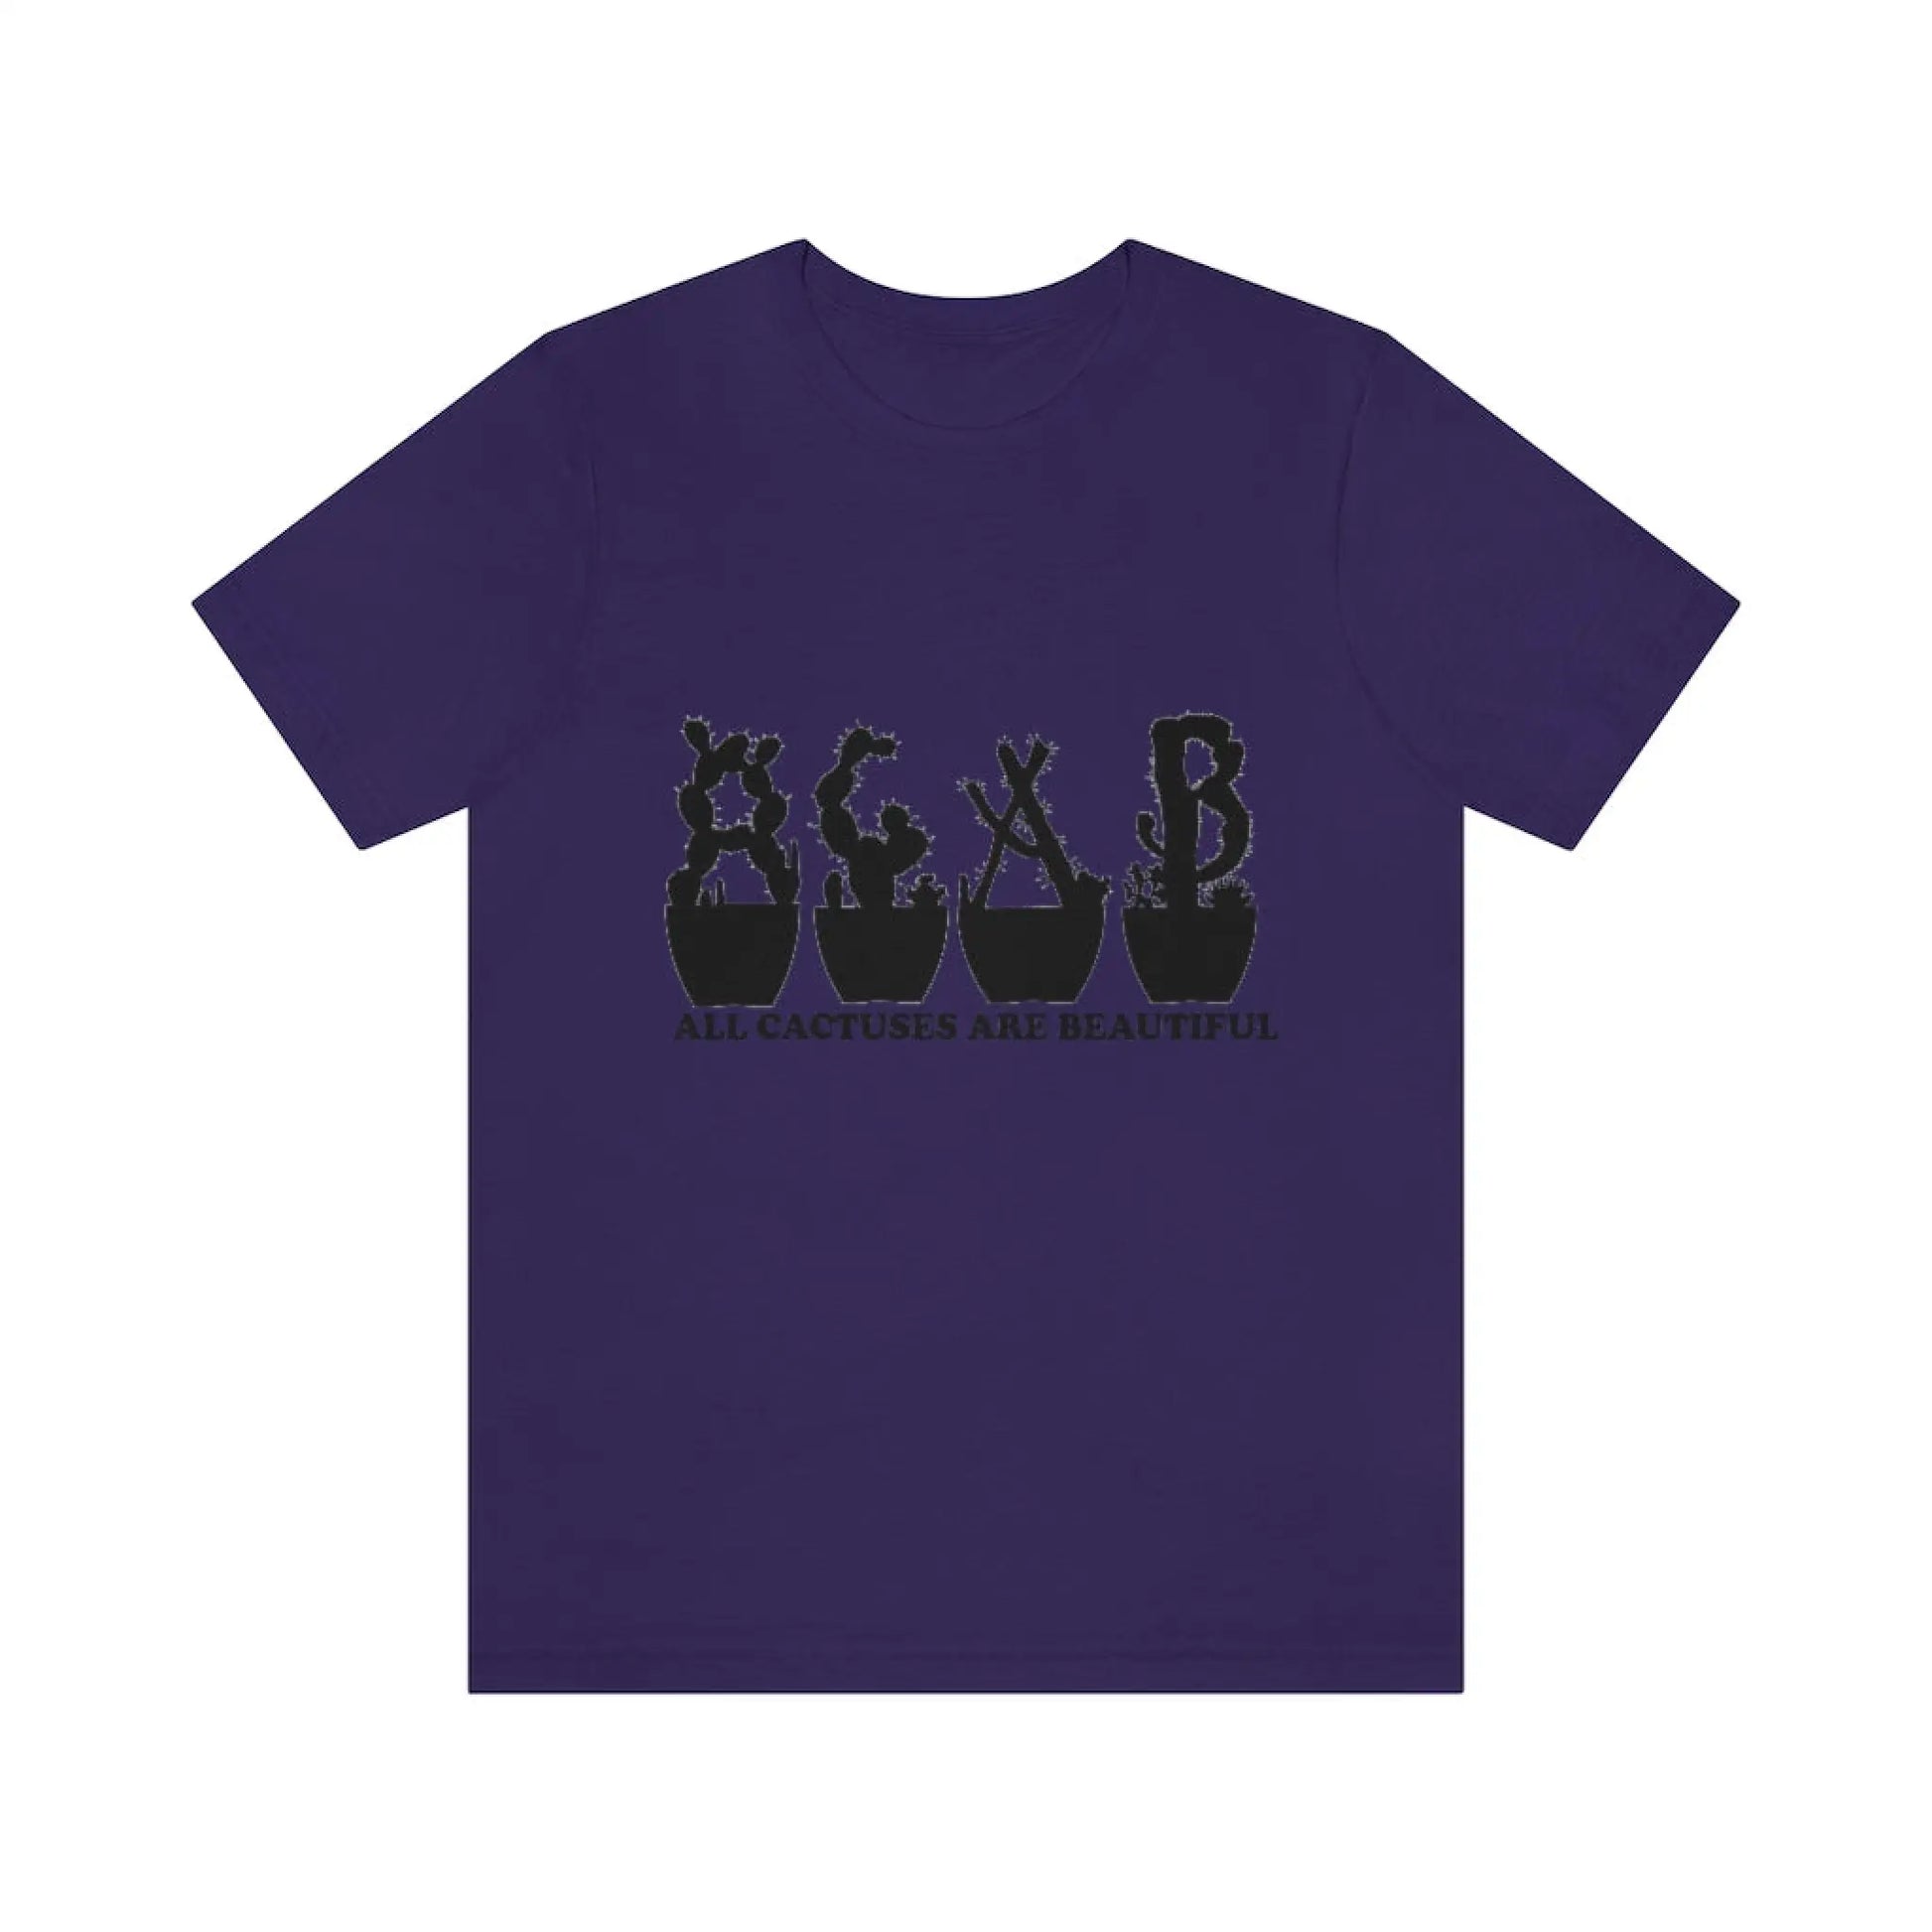 Shirts - All Cactuses Are Beautiful - Team Purple / S -